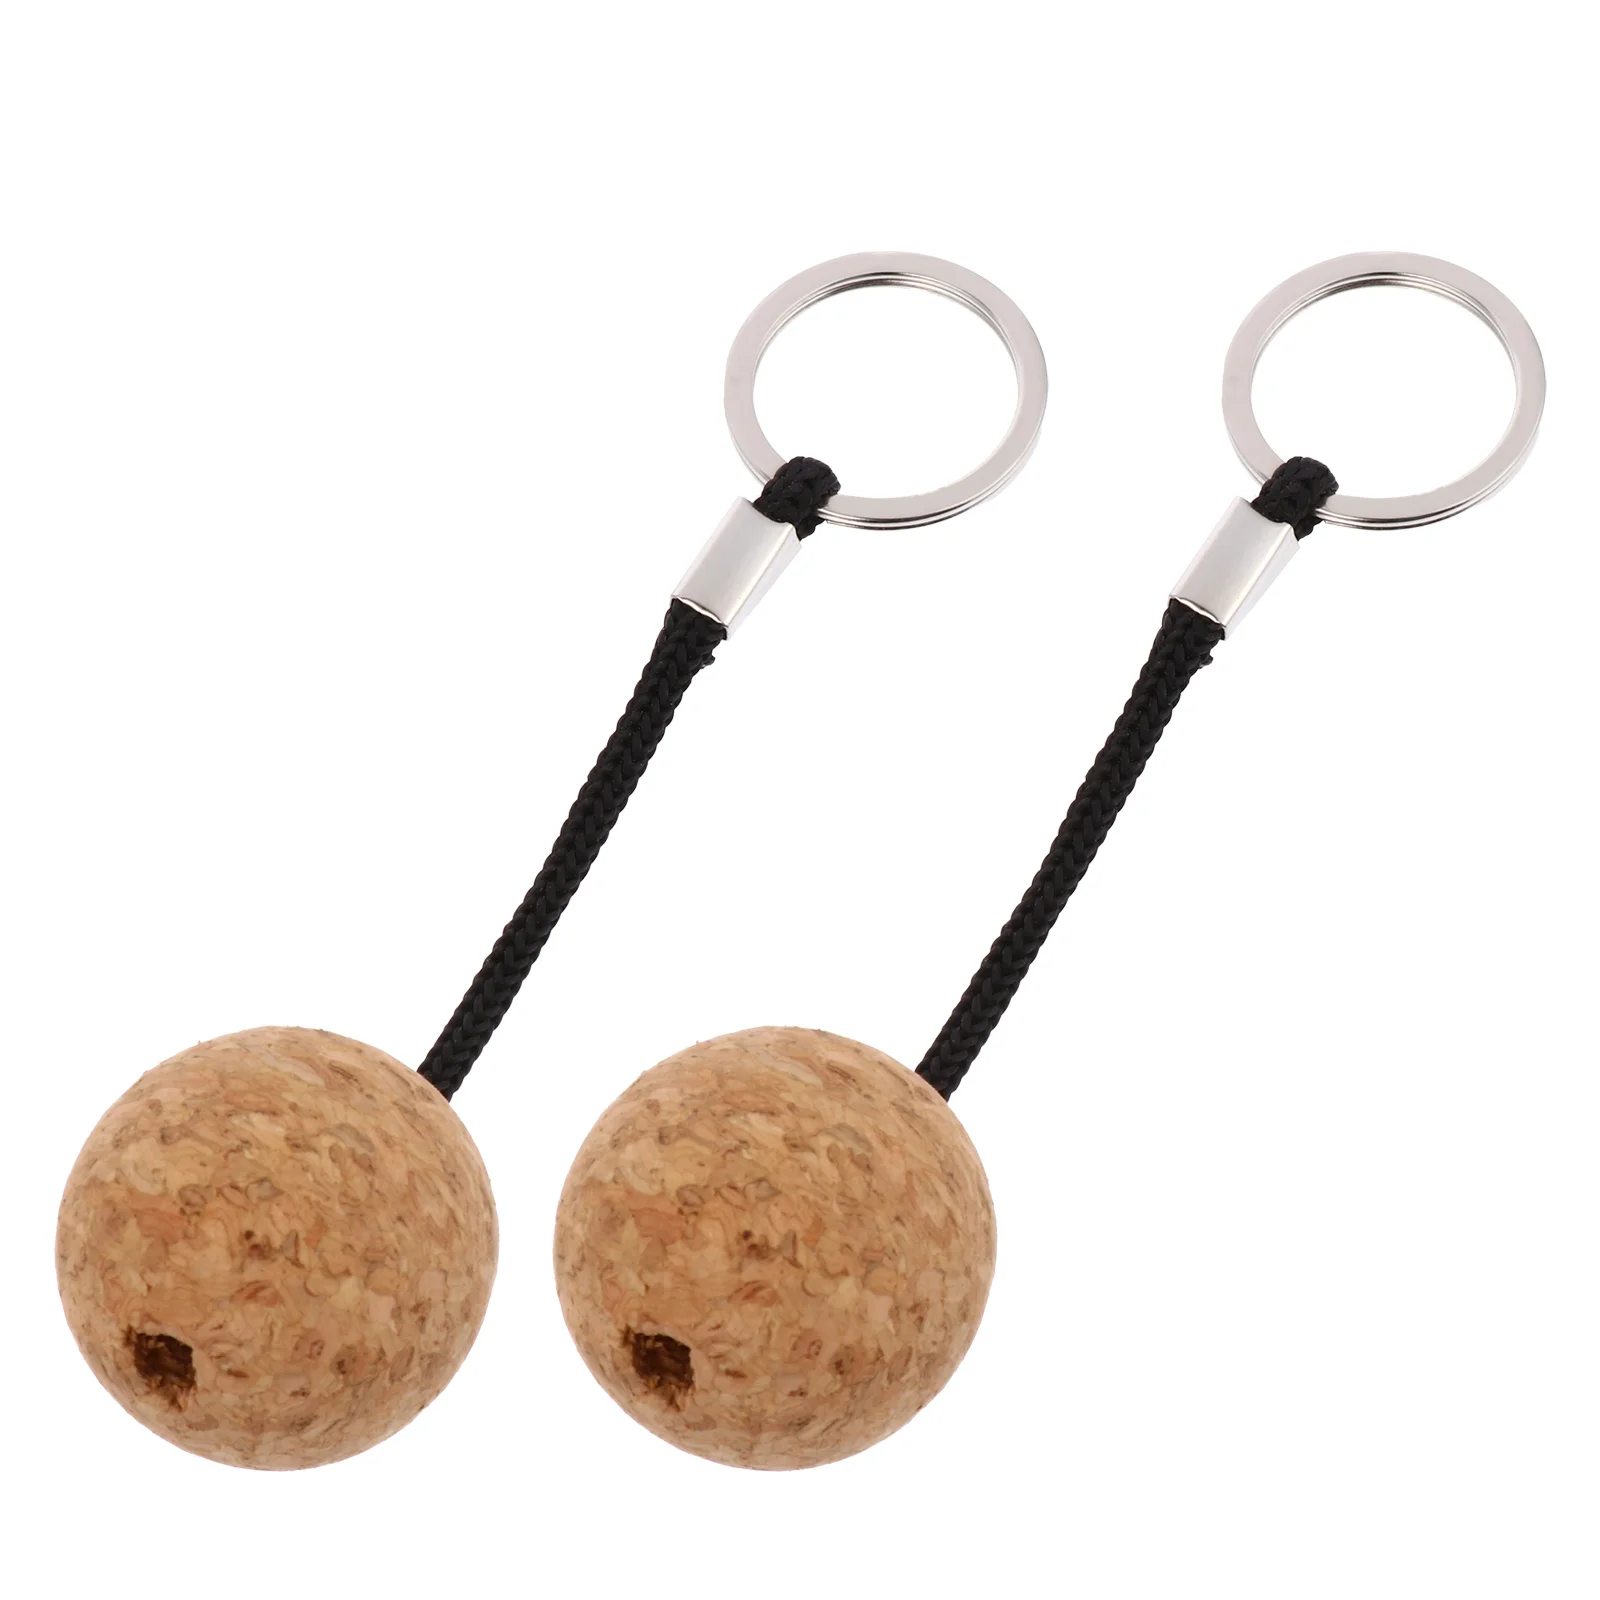 

2 Pcs Fishing Keychain Cork Float Floatable Ball Floating Outdoor Wooden Keyring Boat supplies